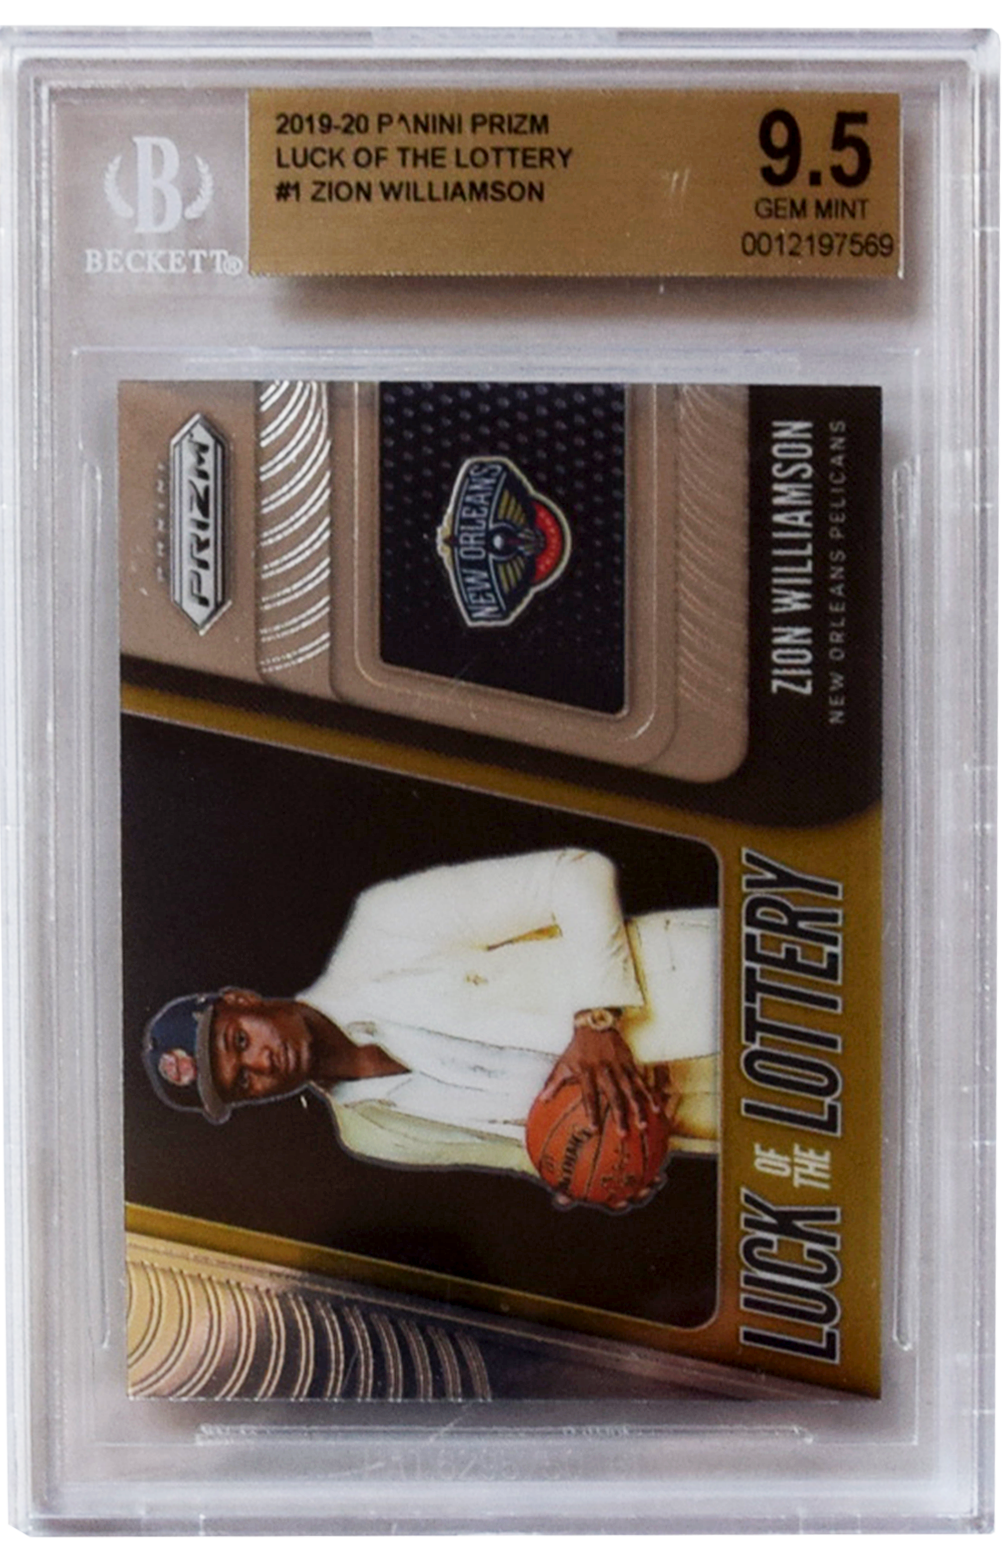 2019-20 Panini Prizm | Luck of the Lottery | #1 Zion Wililamson BGS 9.5 Gem Mint